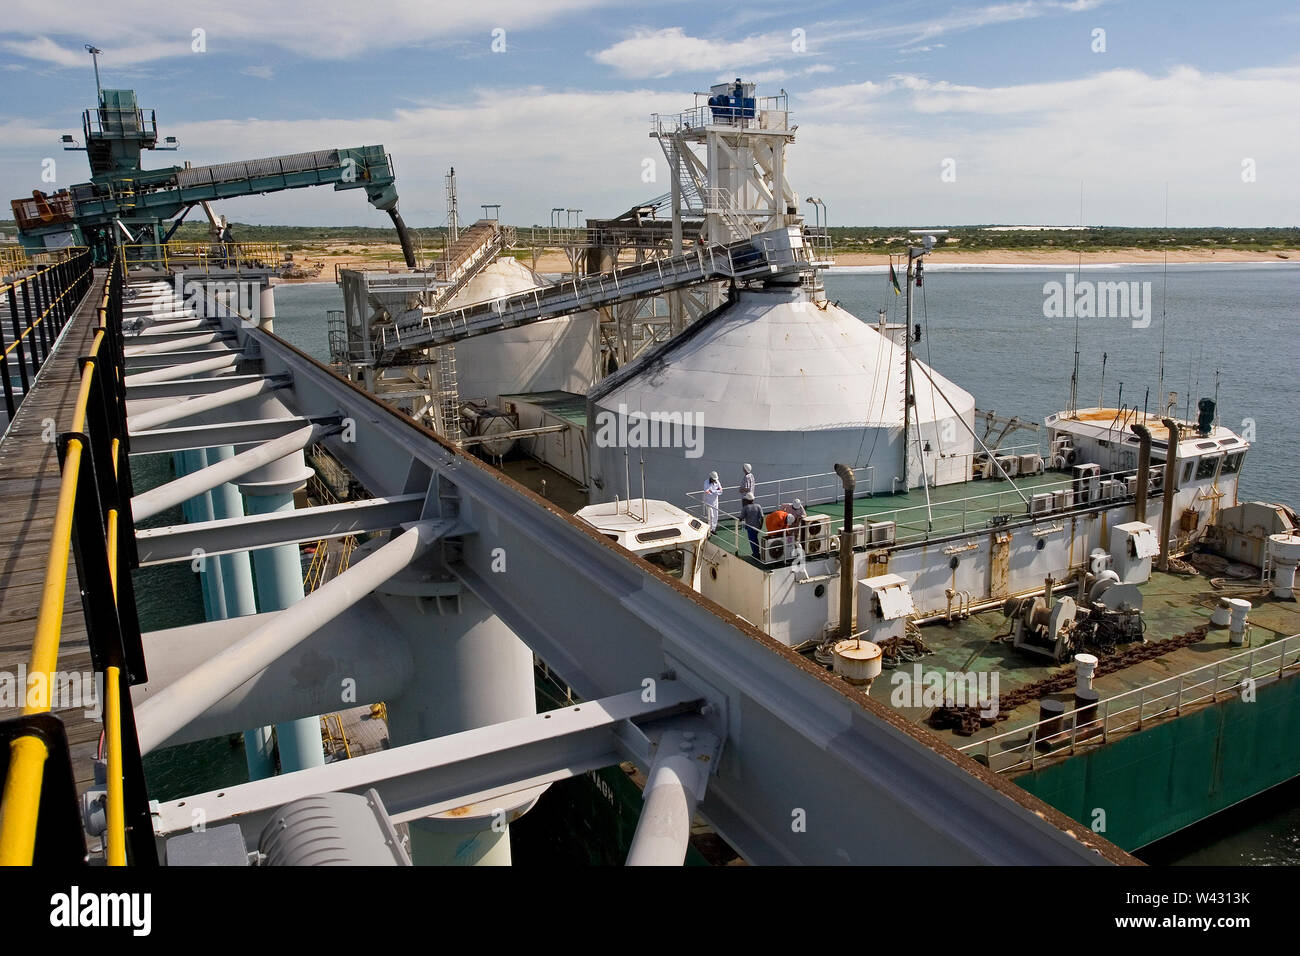 Mining, managing & transporting of titanium mineral sands. Port facility with loading barge hoppers with product via boom before transhipment.to OGV. Stock Photo